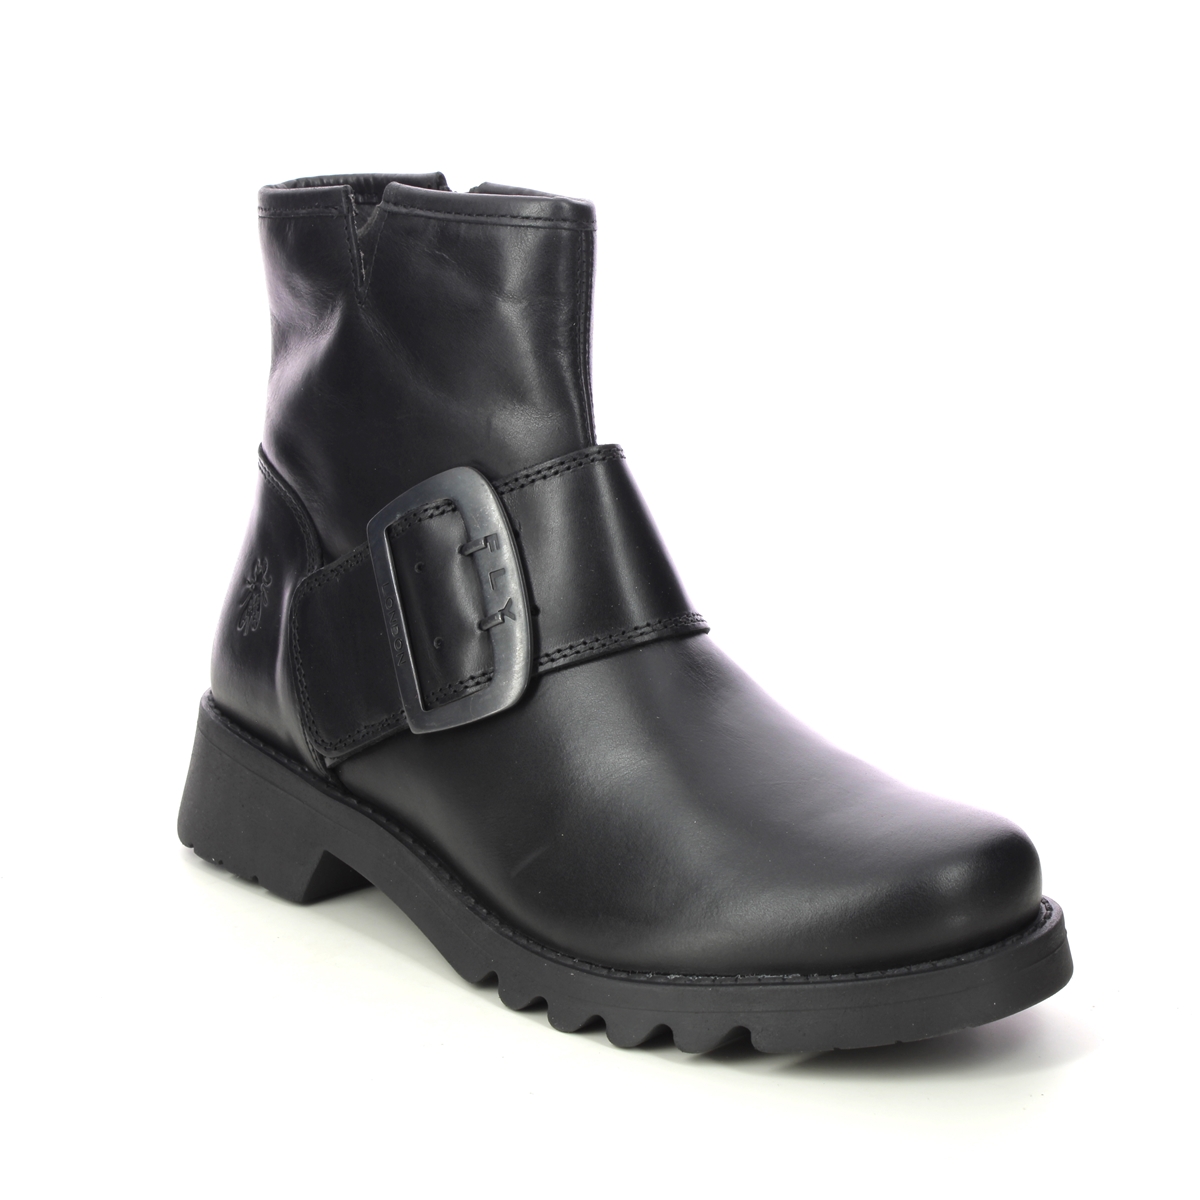 Fly London Rily   Ronin Black Leather Womens Ankle Boots P144991 In Size 41 In Plain Black Leather